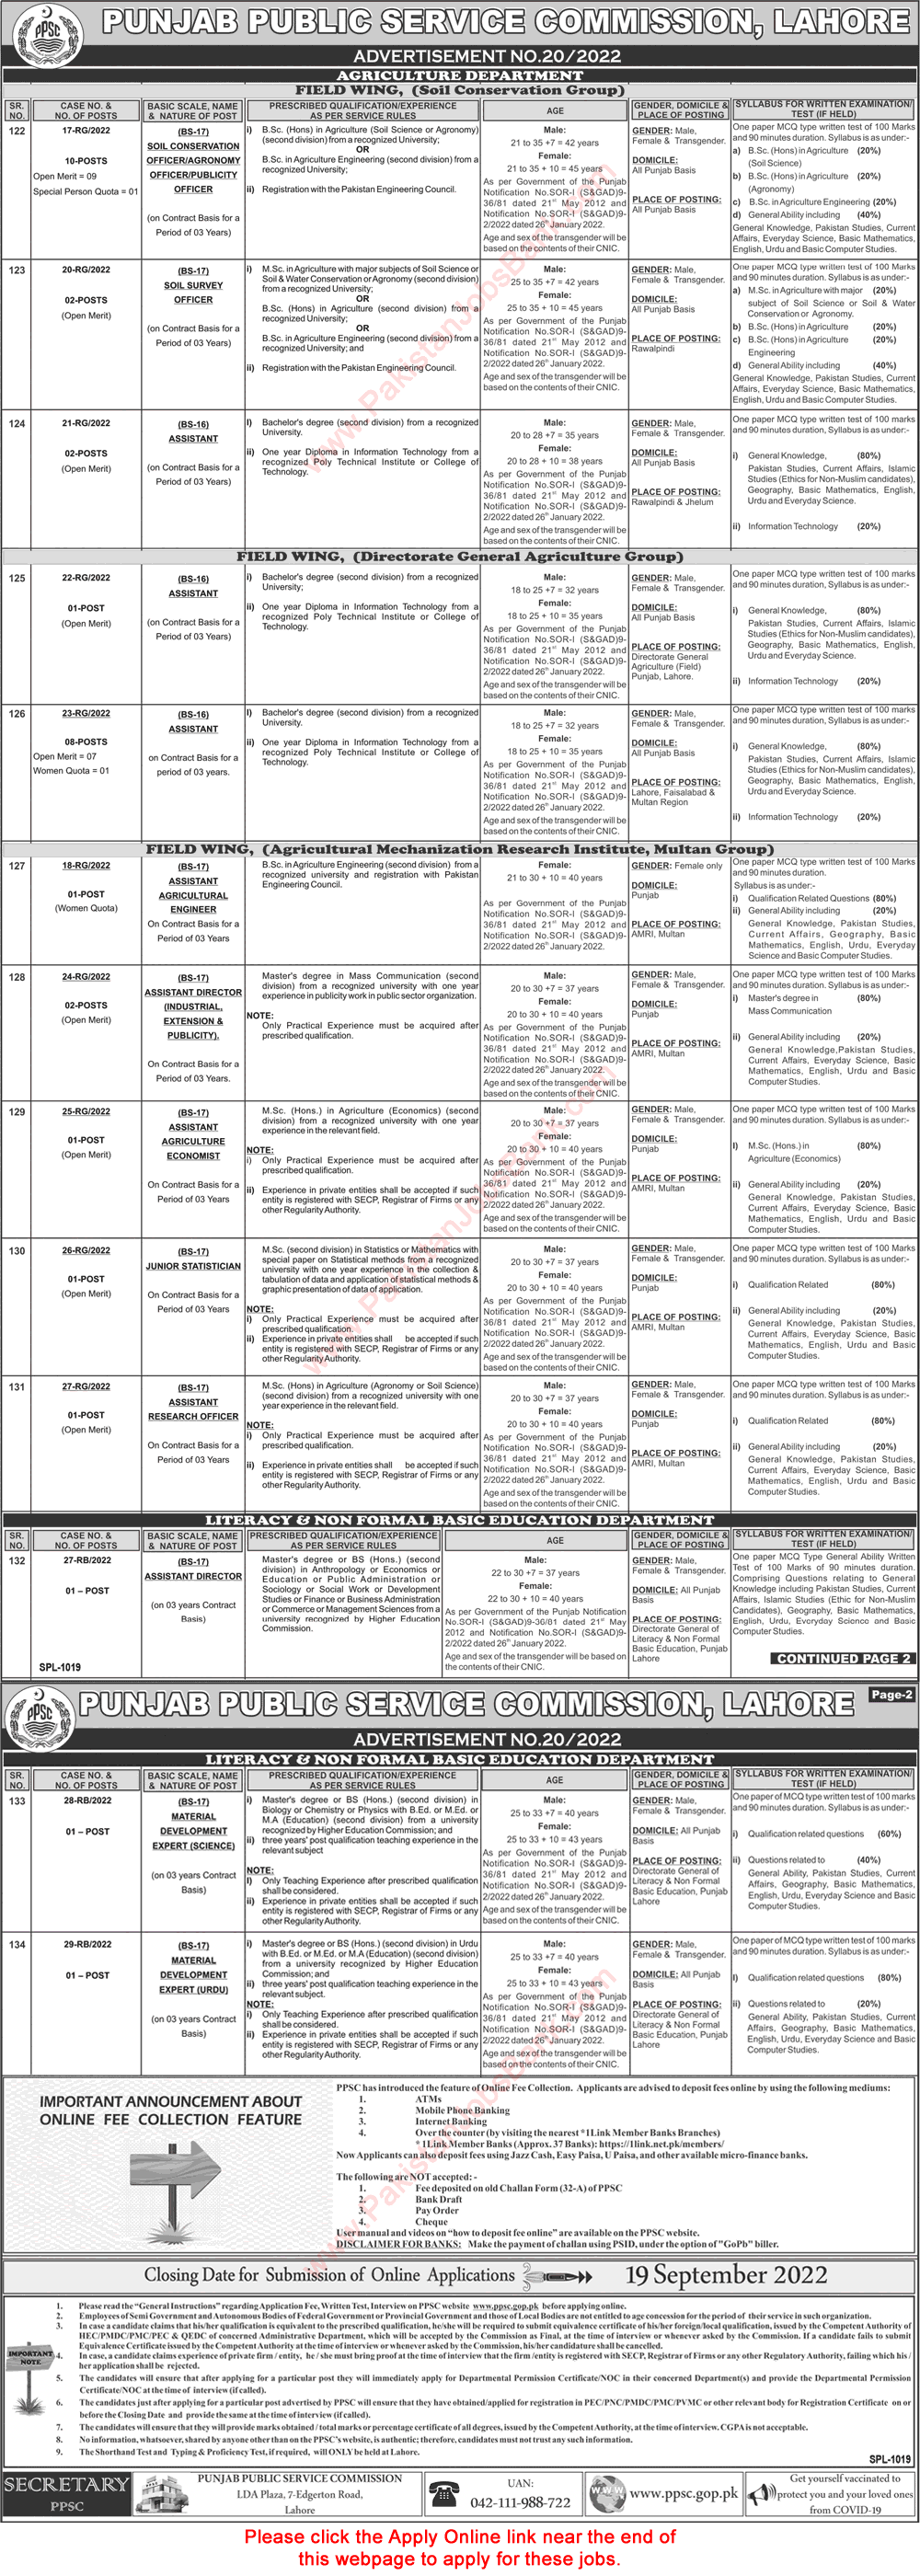 PPSC Jobs September 2022 Consolidated Advertisement No 20/2022 Online Apply Latest